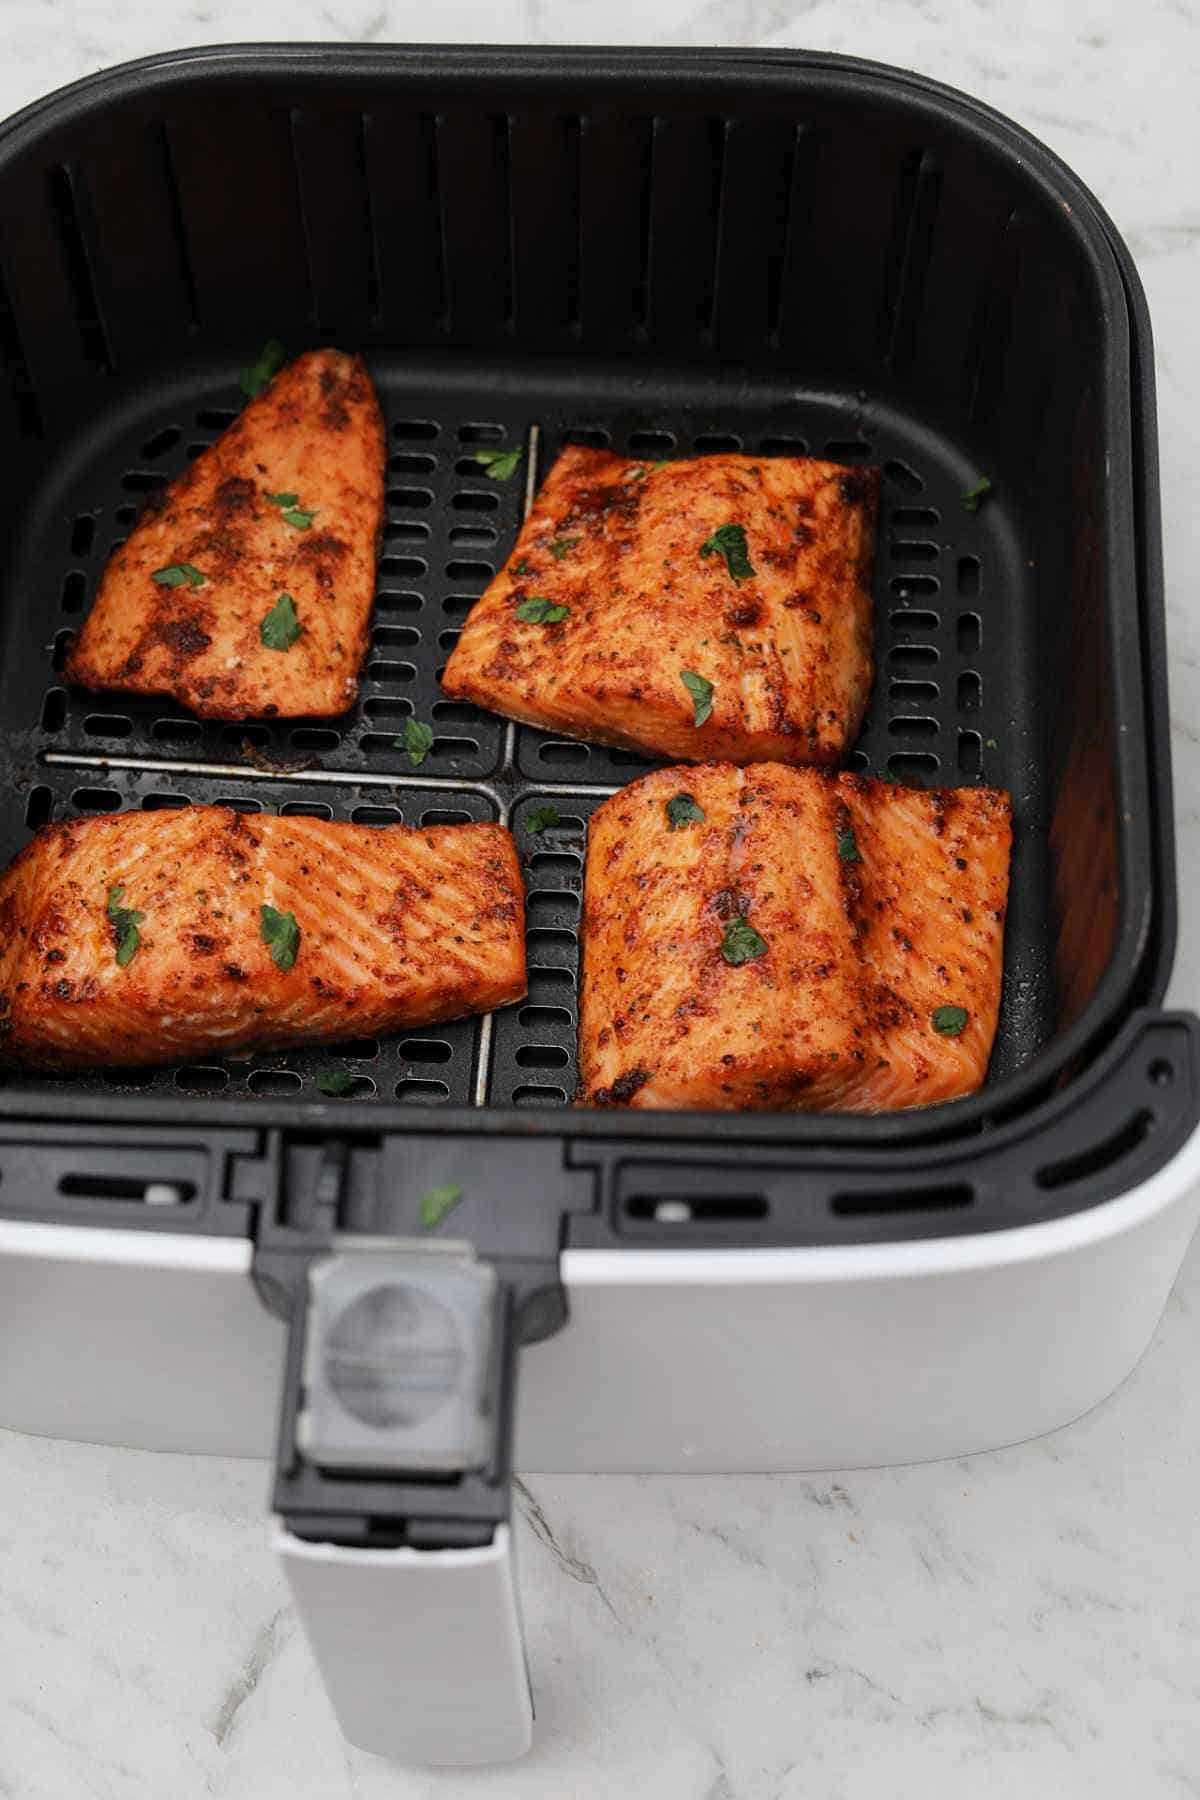 4 cooked trout in air fryer basket.